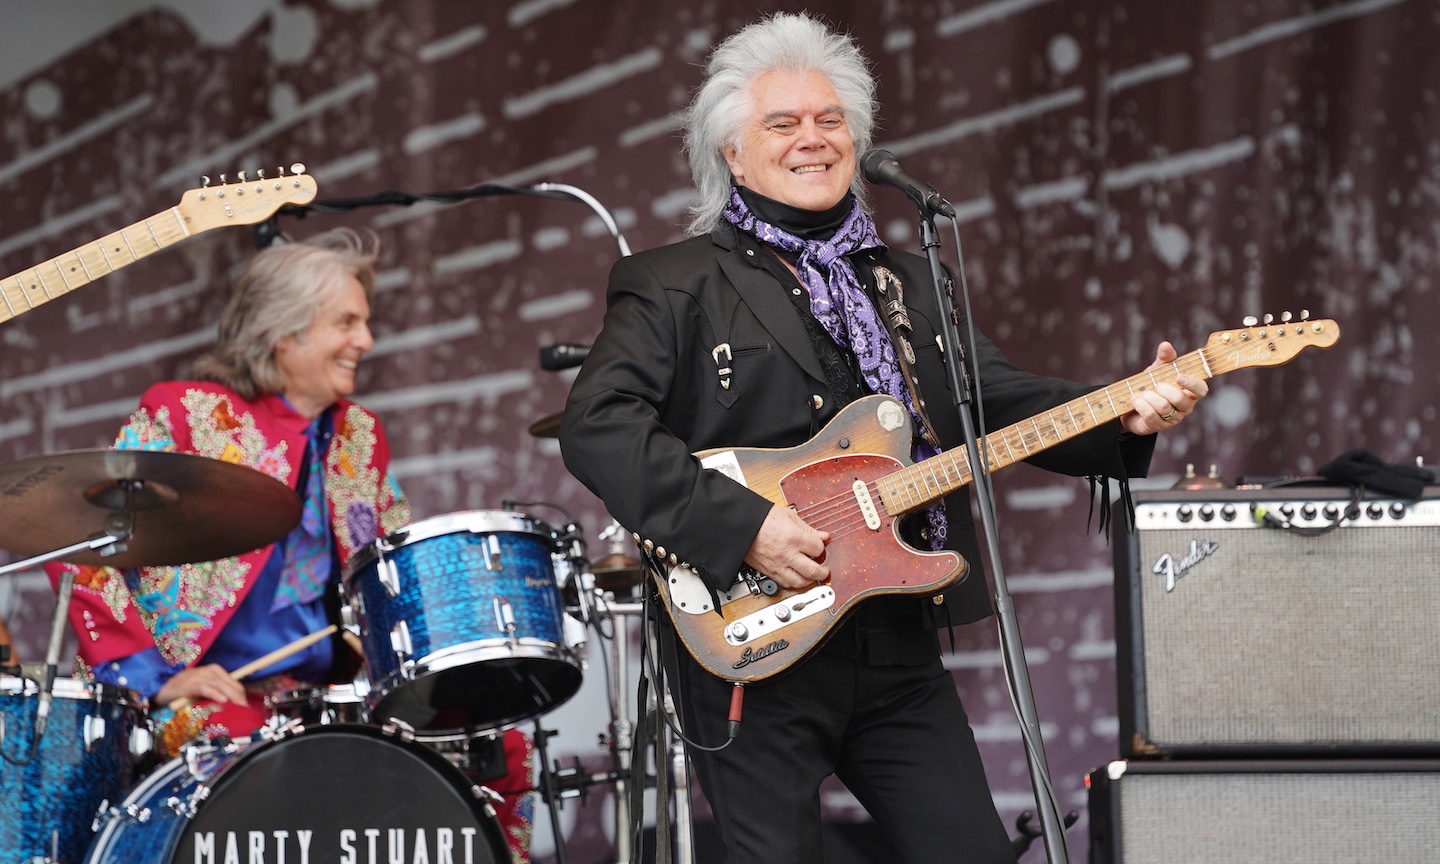 Marty Stuart Returns With New Single ‘Country Star’